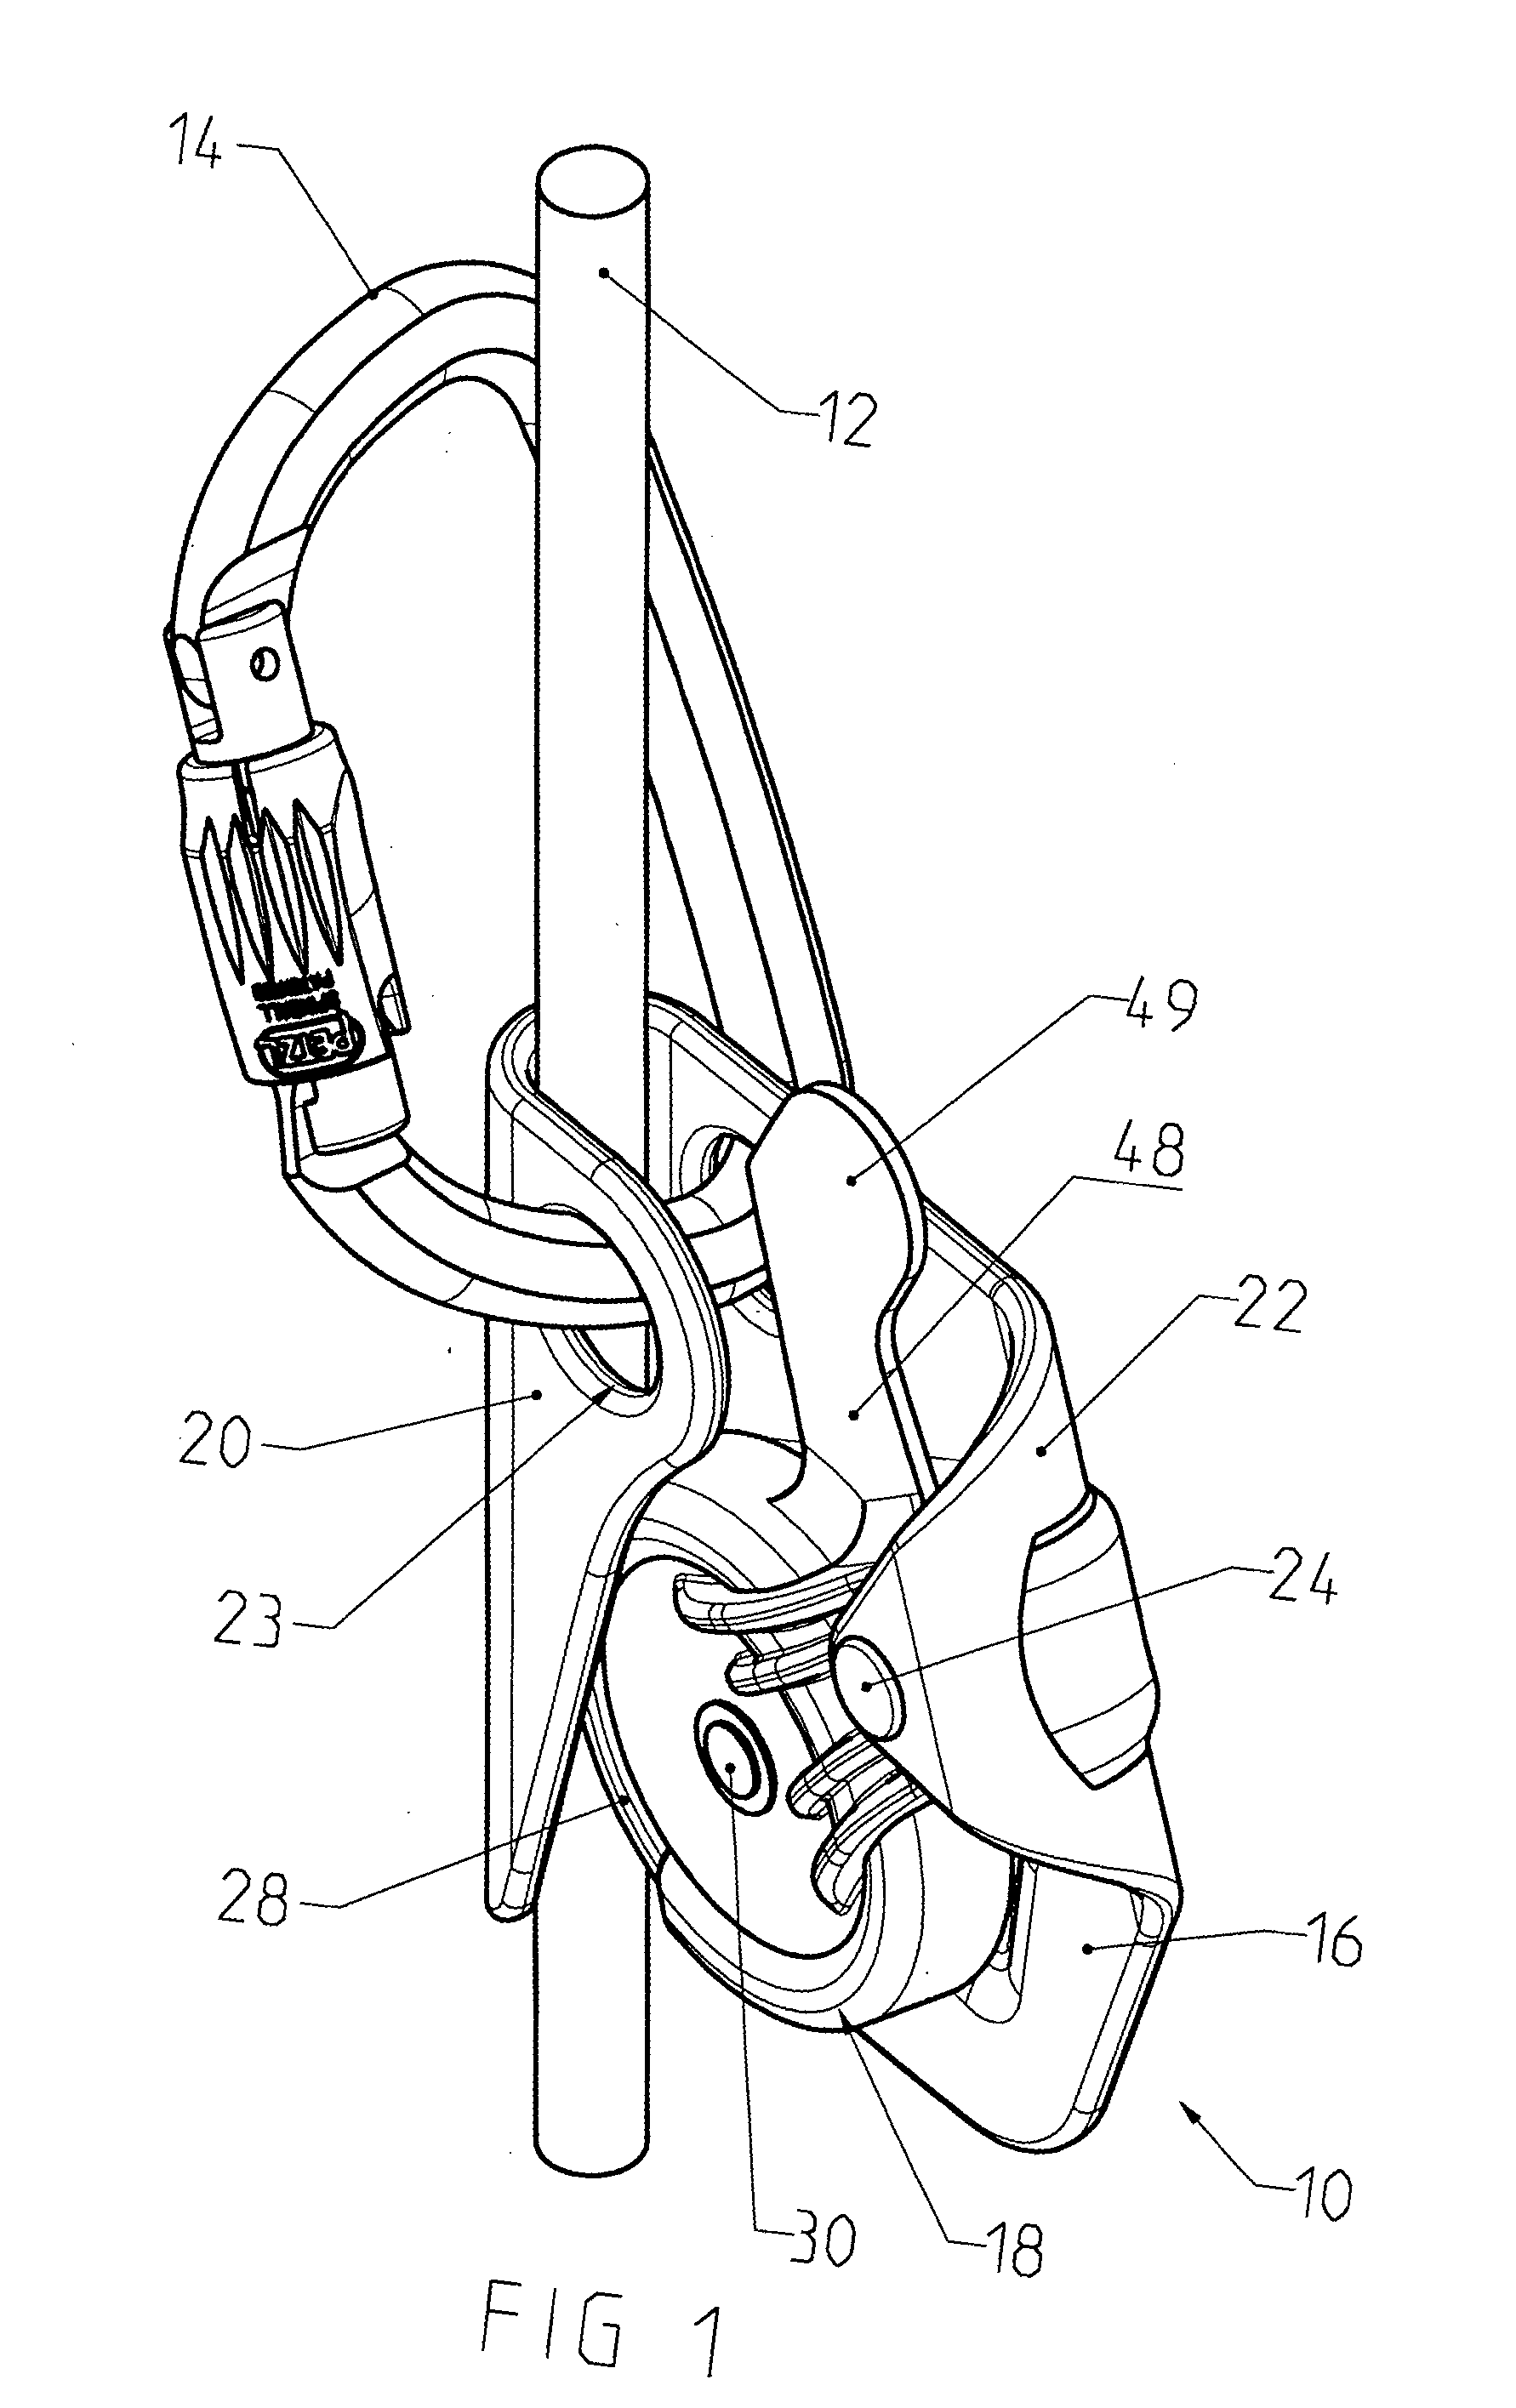 Fall arrest device for a fixed rope